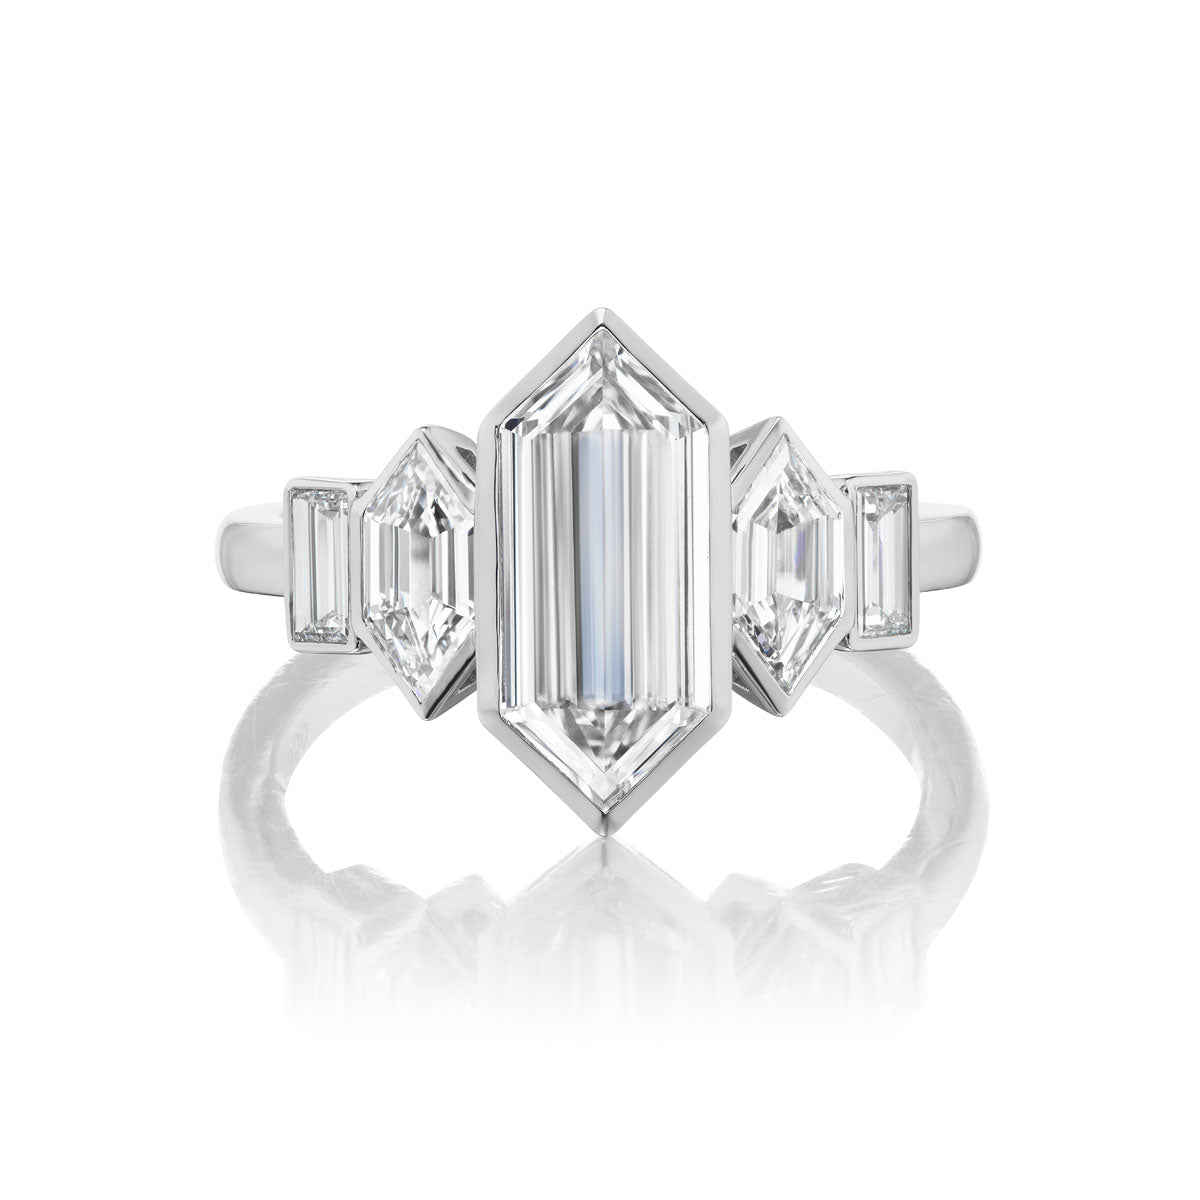 Elongated Hexagon Diamond Engagement Ring with Hexagon and Baguette Side Stones